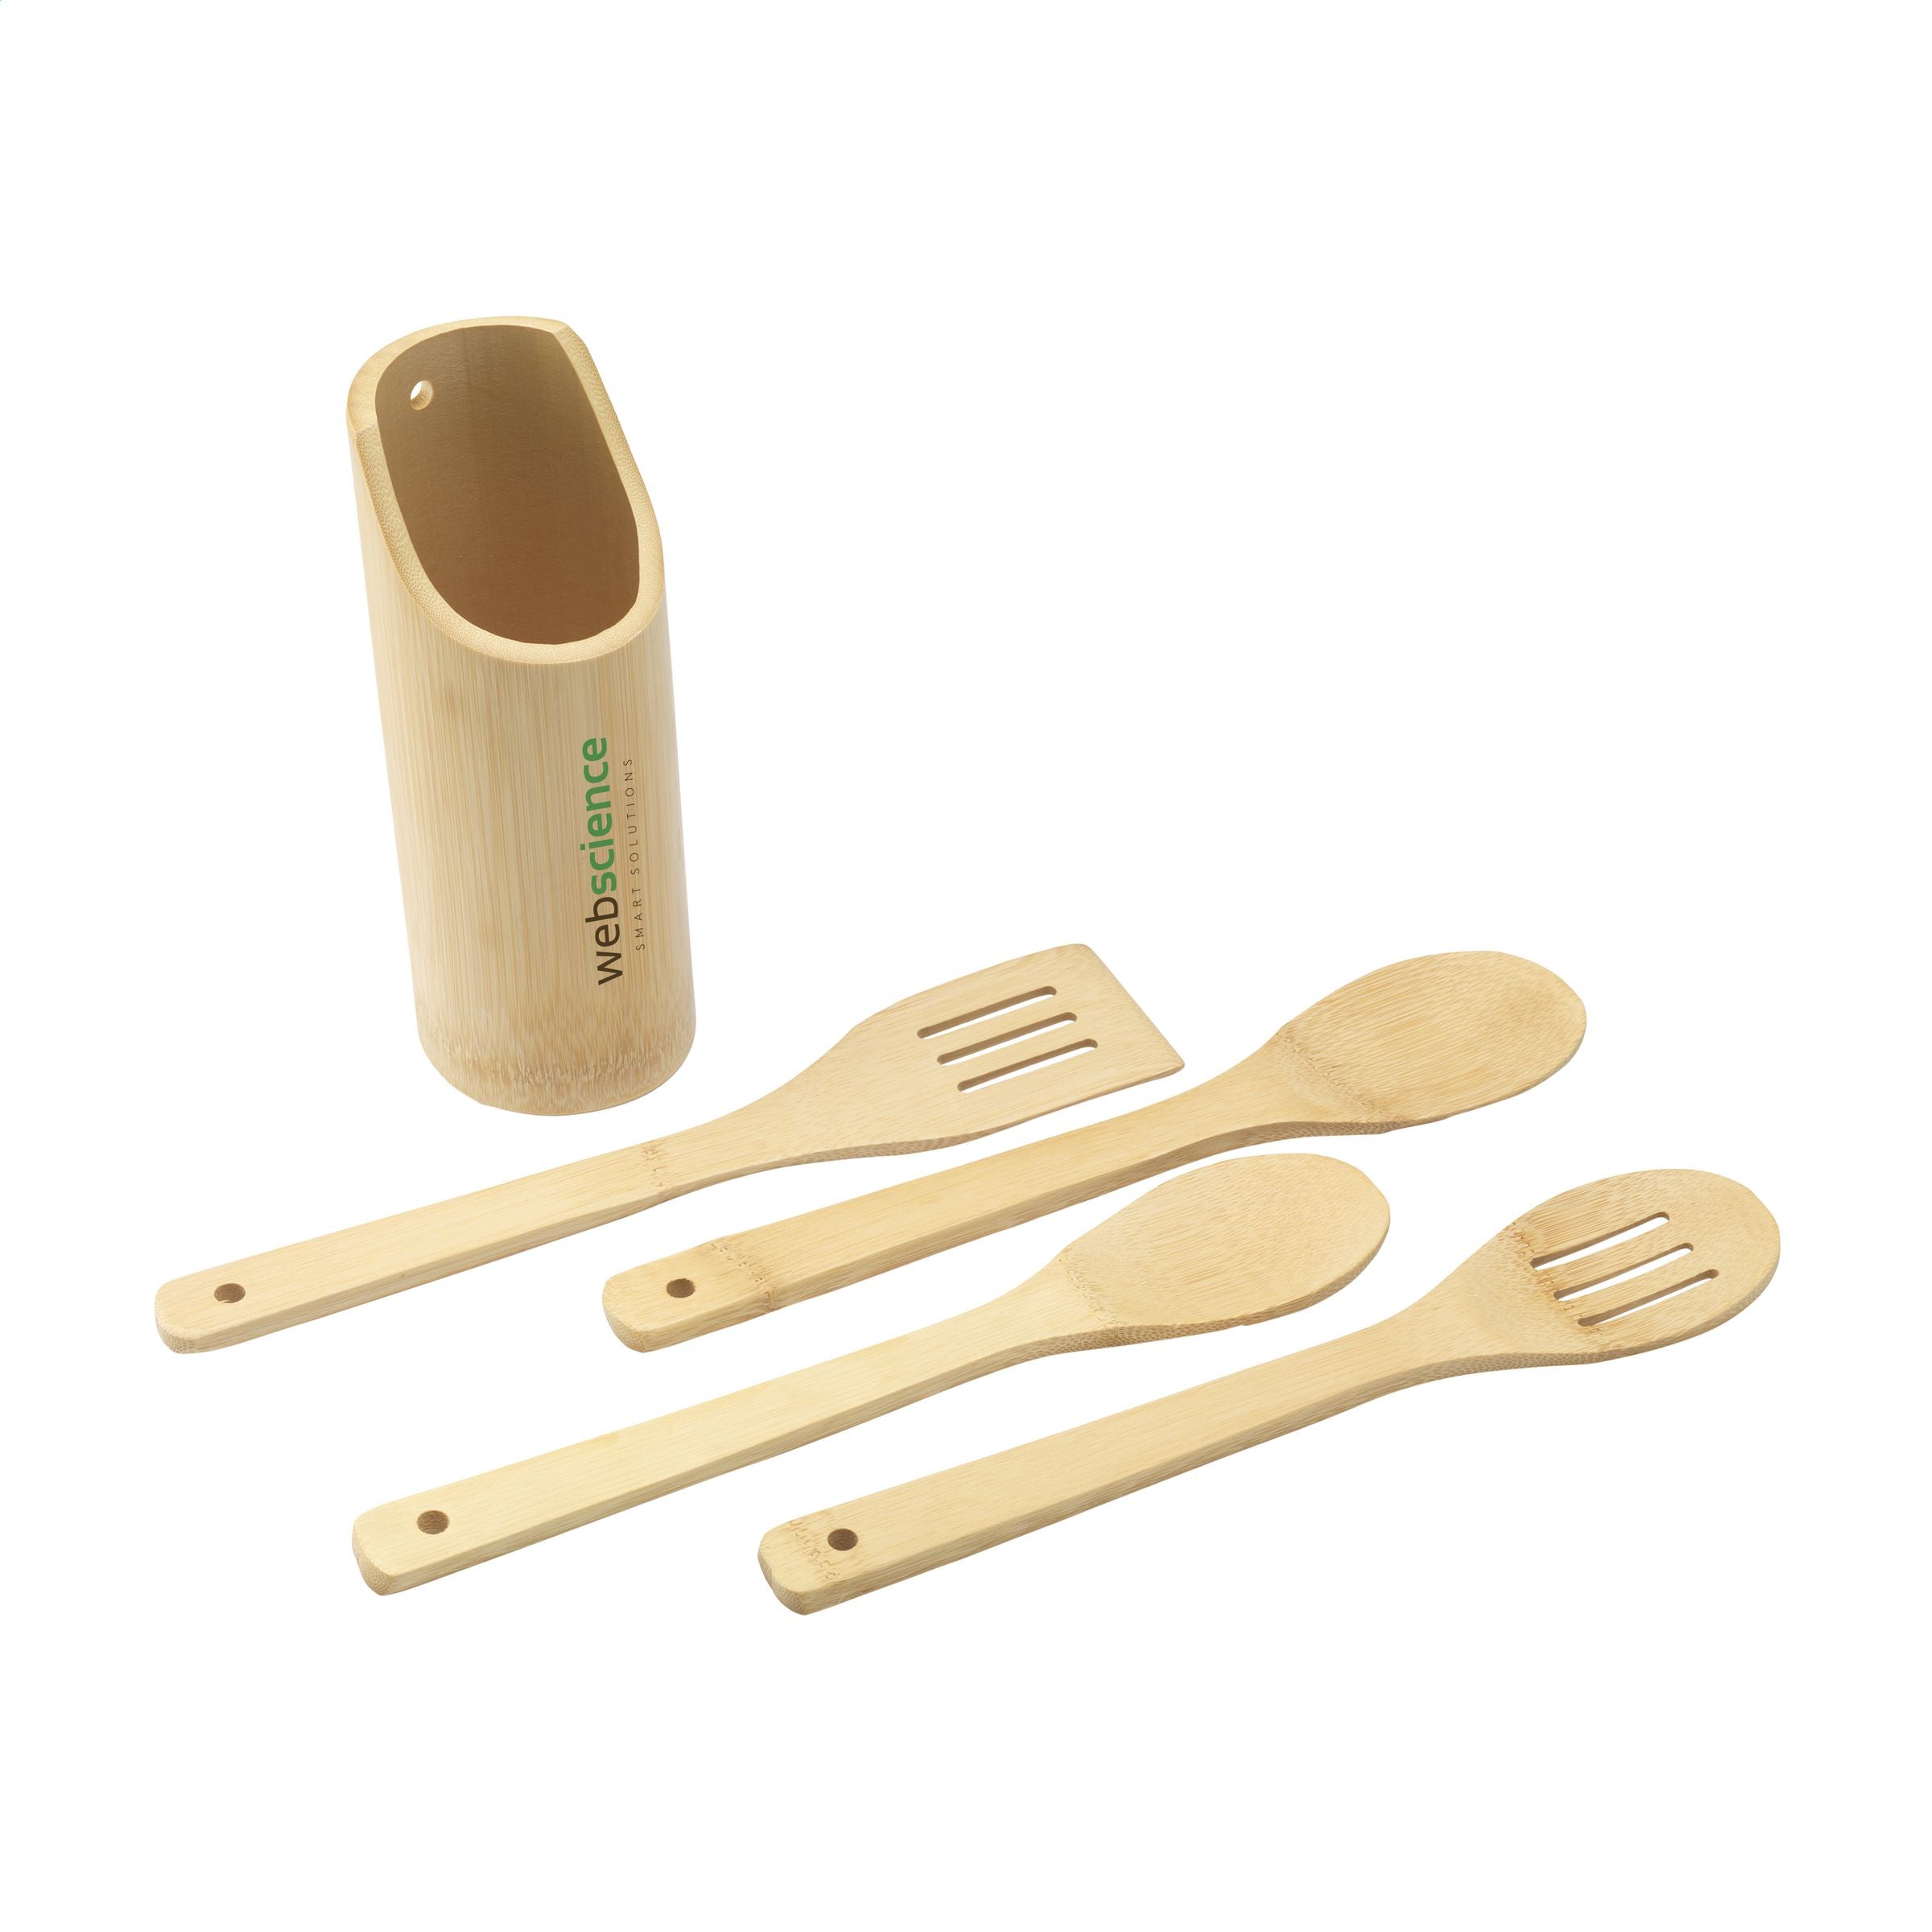 Bamboo Branded Cooking/Kitchen Set kitchen